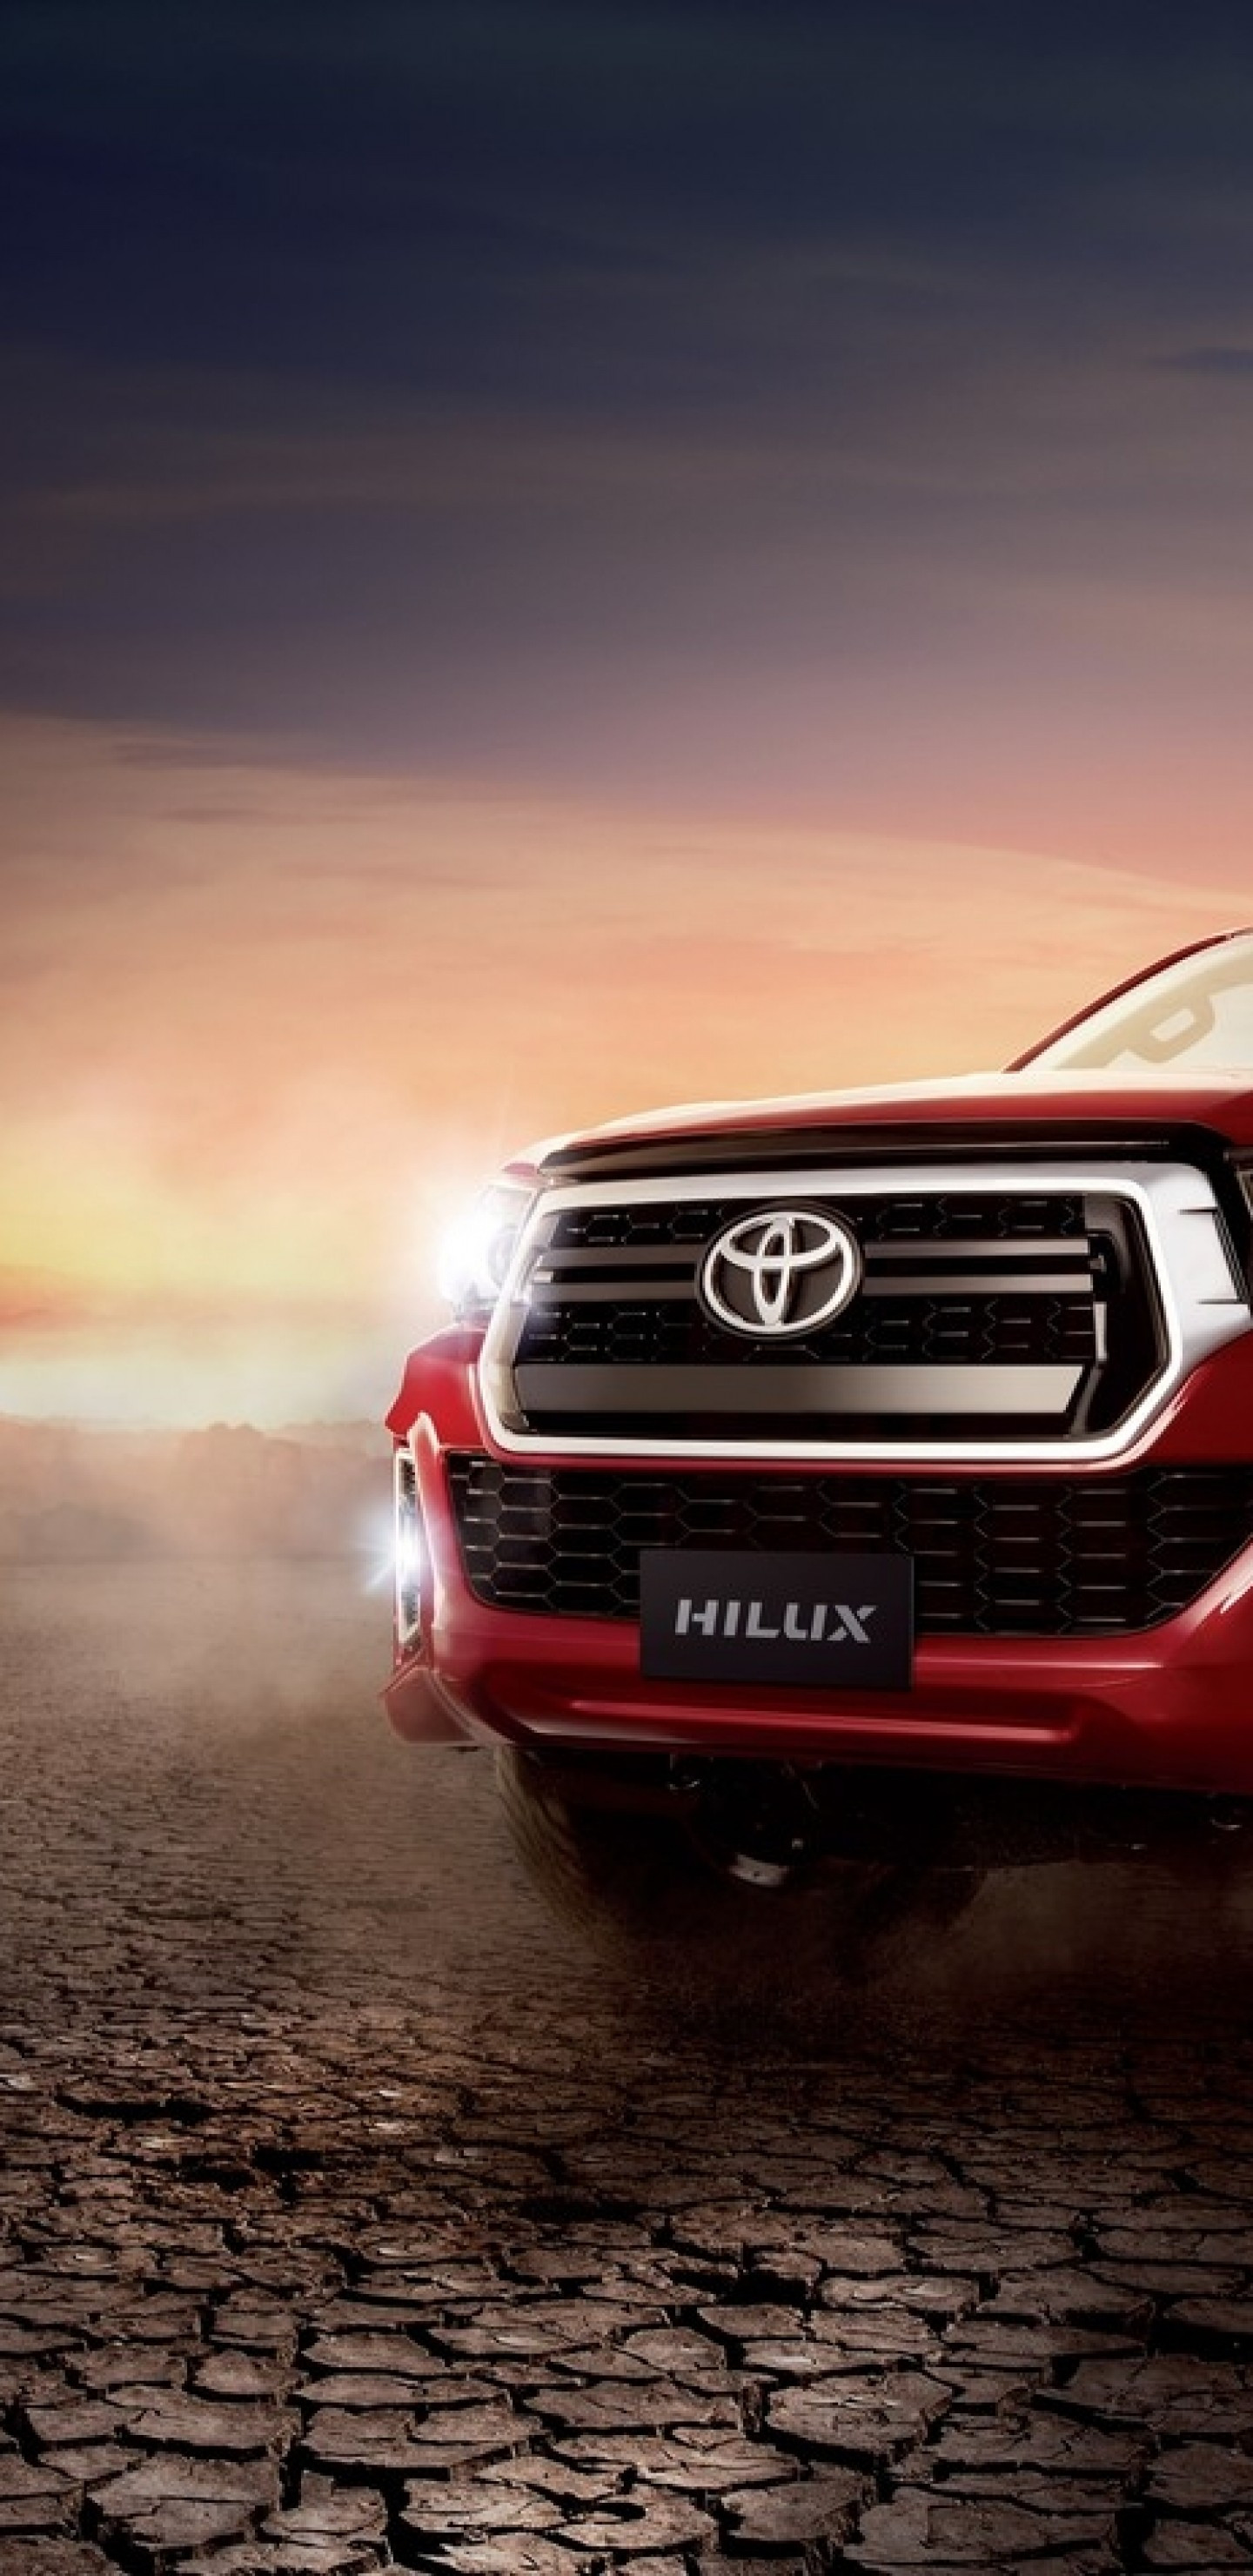 Download 1440x2960 Toyota Hilux Pickup Cars, Red Wallpaper for Samsung Galaxy S Note S S8+, Google Pixel 3 XL